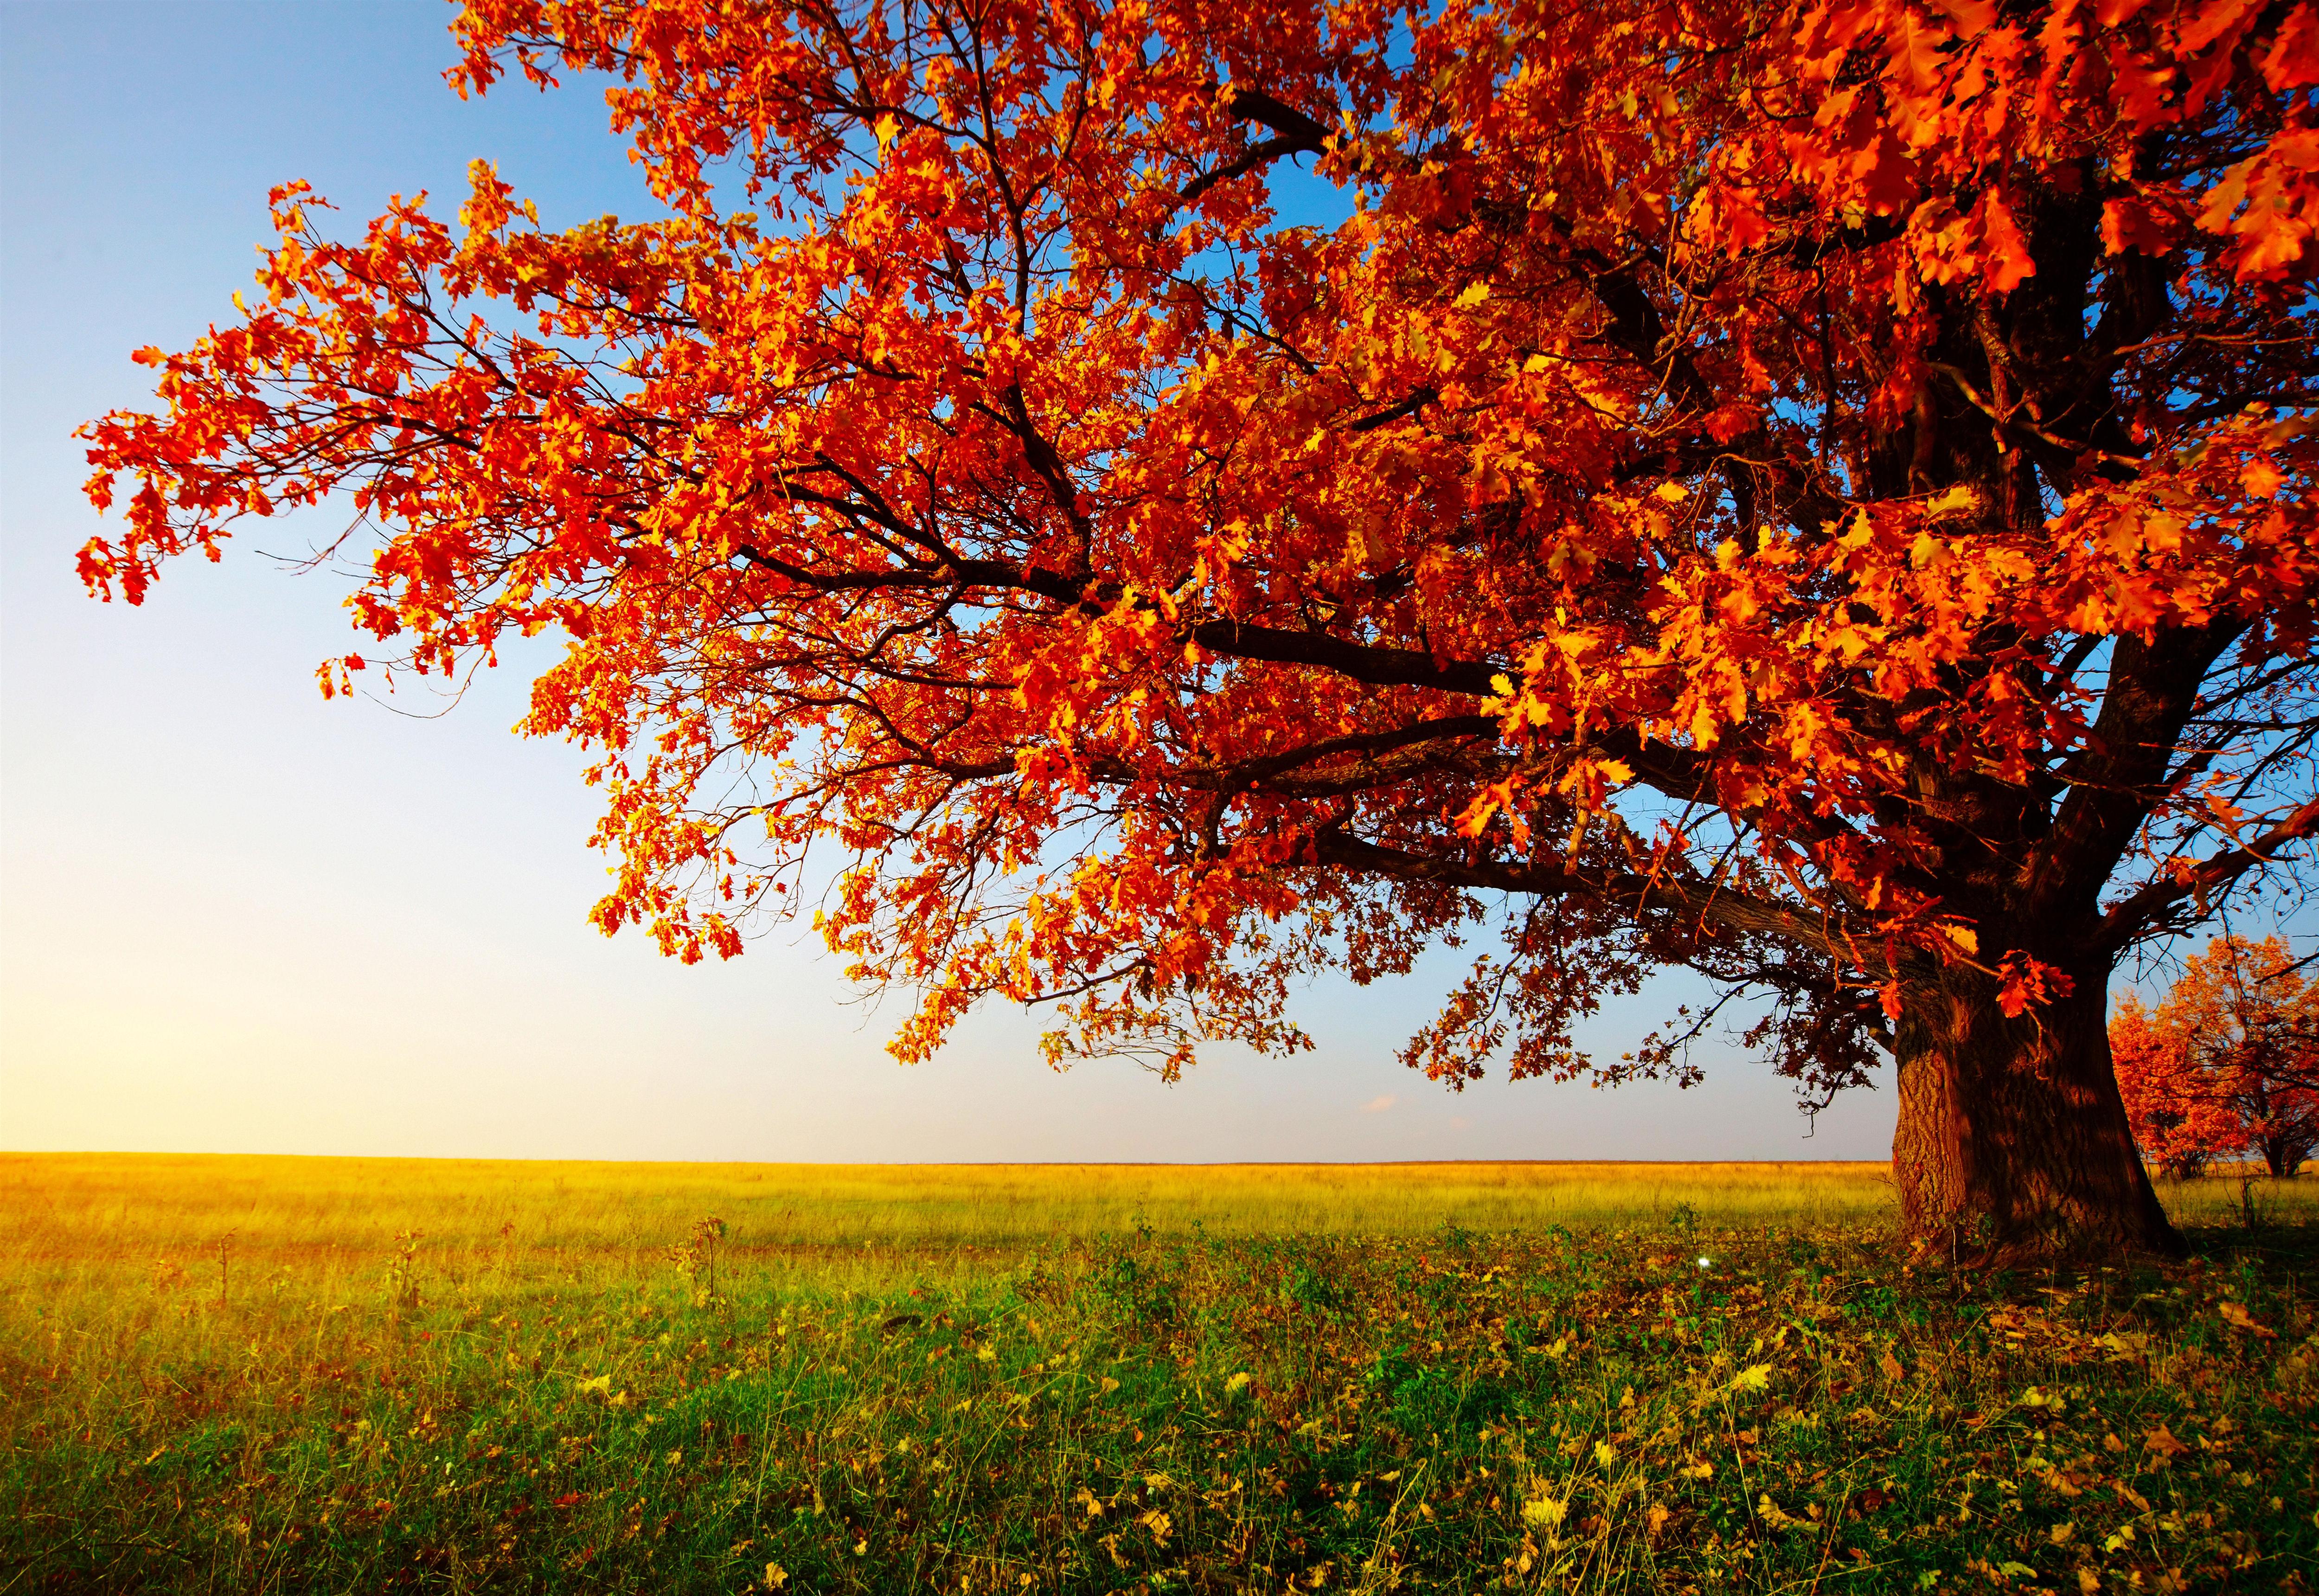 Free Download Autumn Trees Desktop Wallpaper 5000x3441 For Your